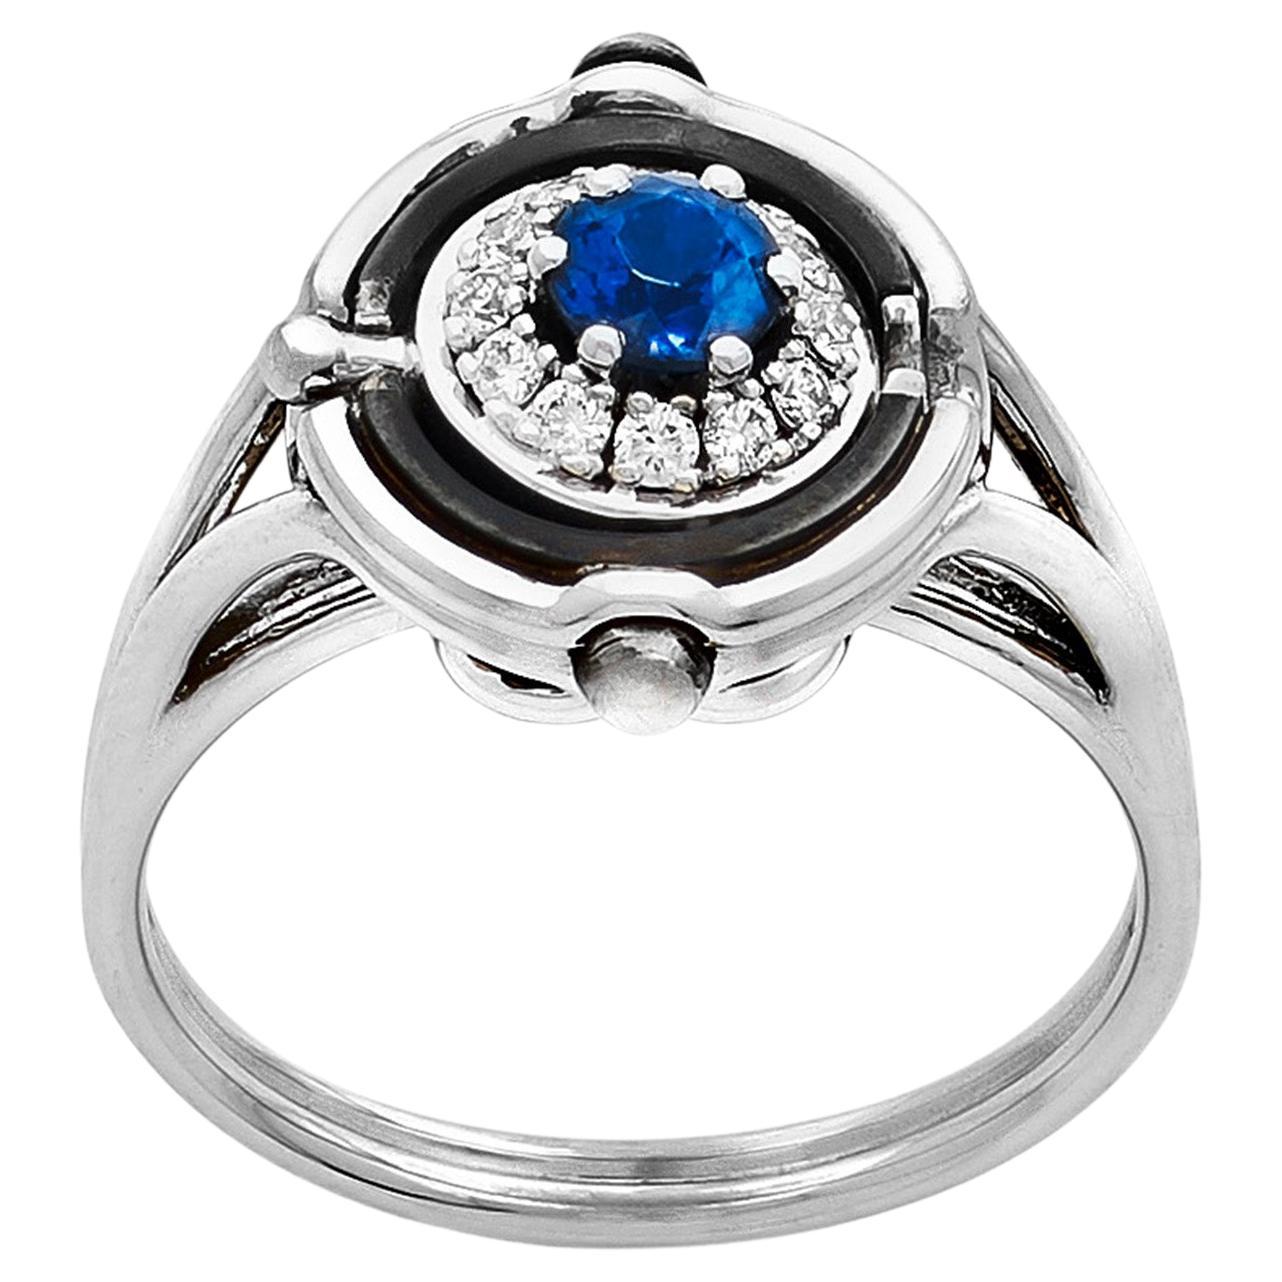 Mira Sapphire & Diamond Ring in 18k White Gold by Elie Top